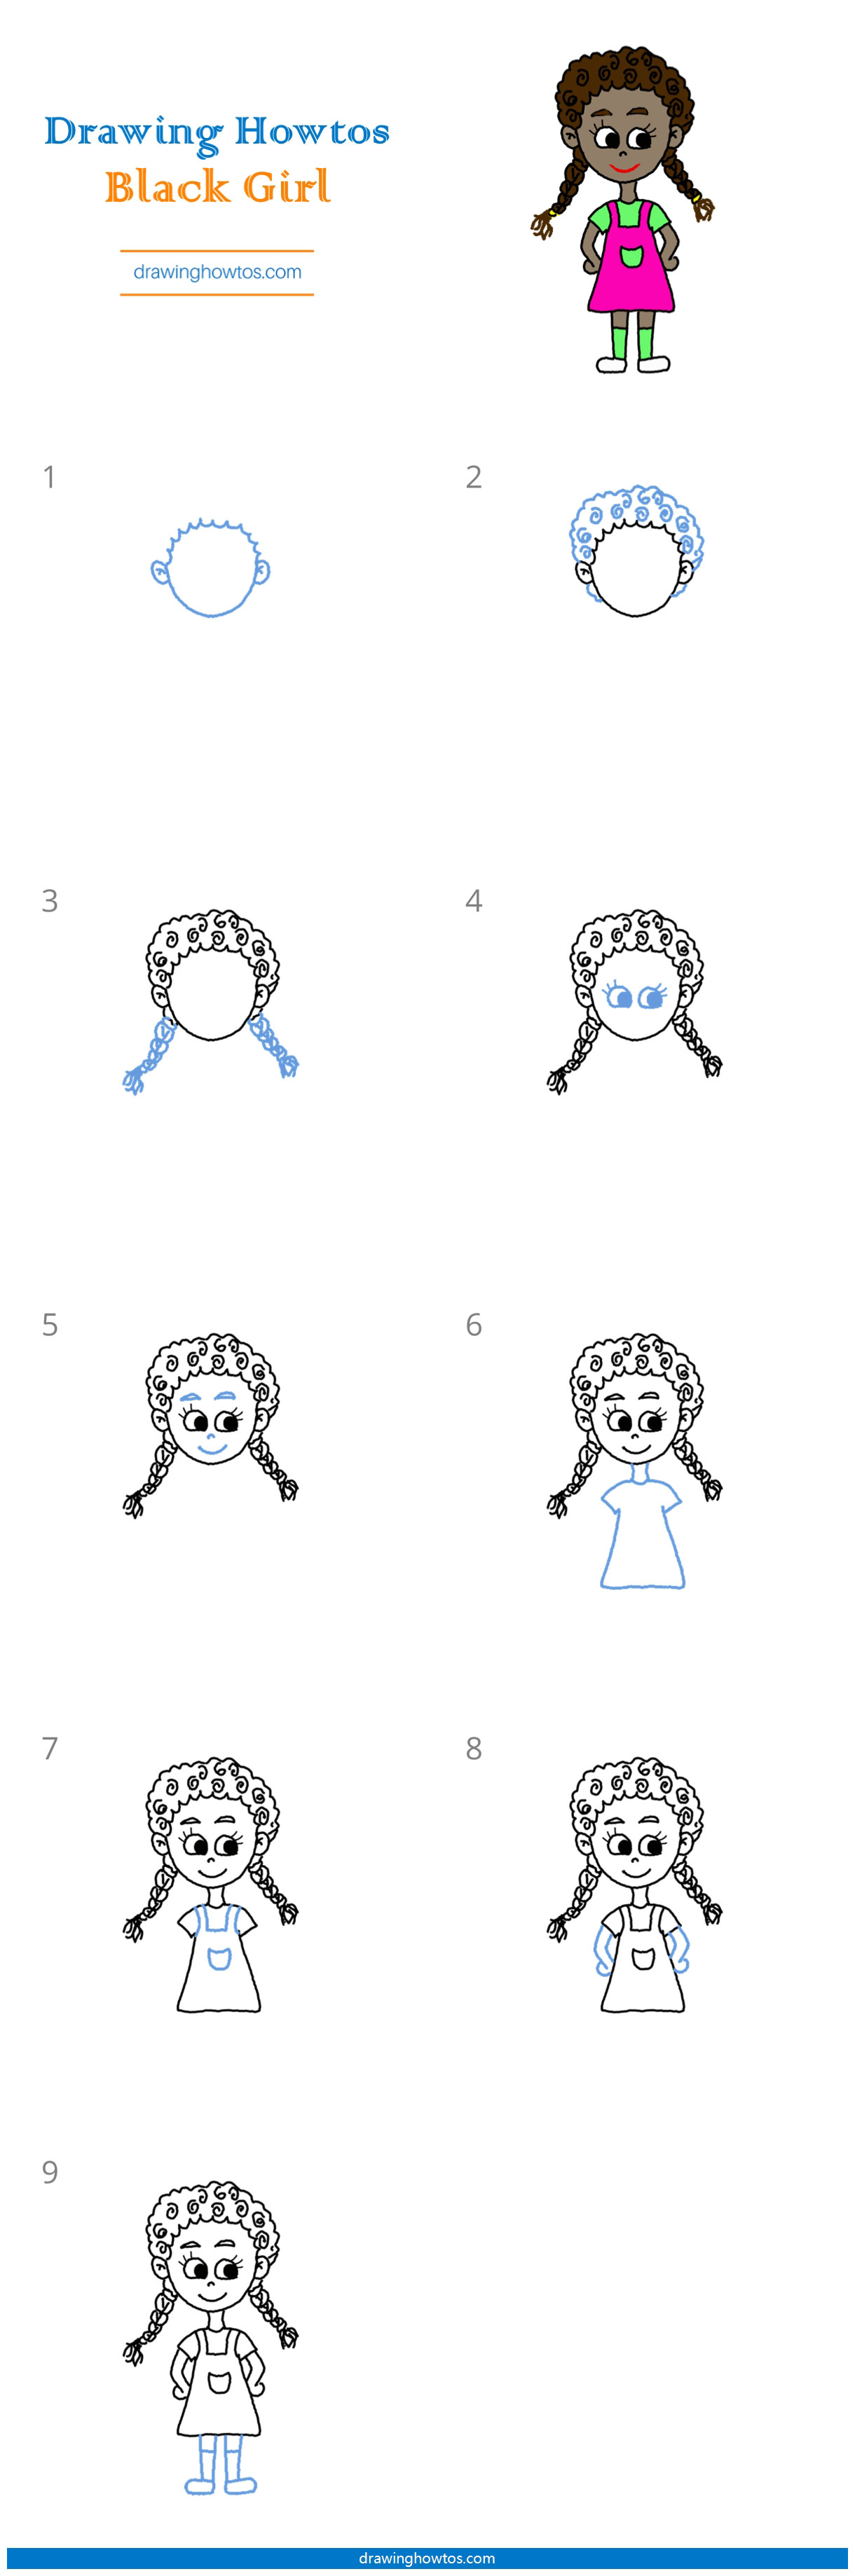 How to Draw a Black Girl Step by Step